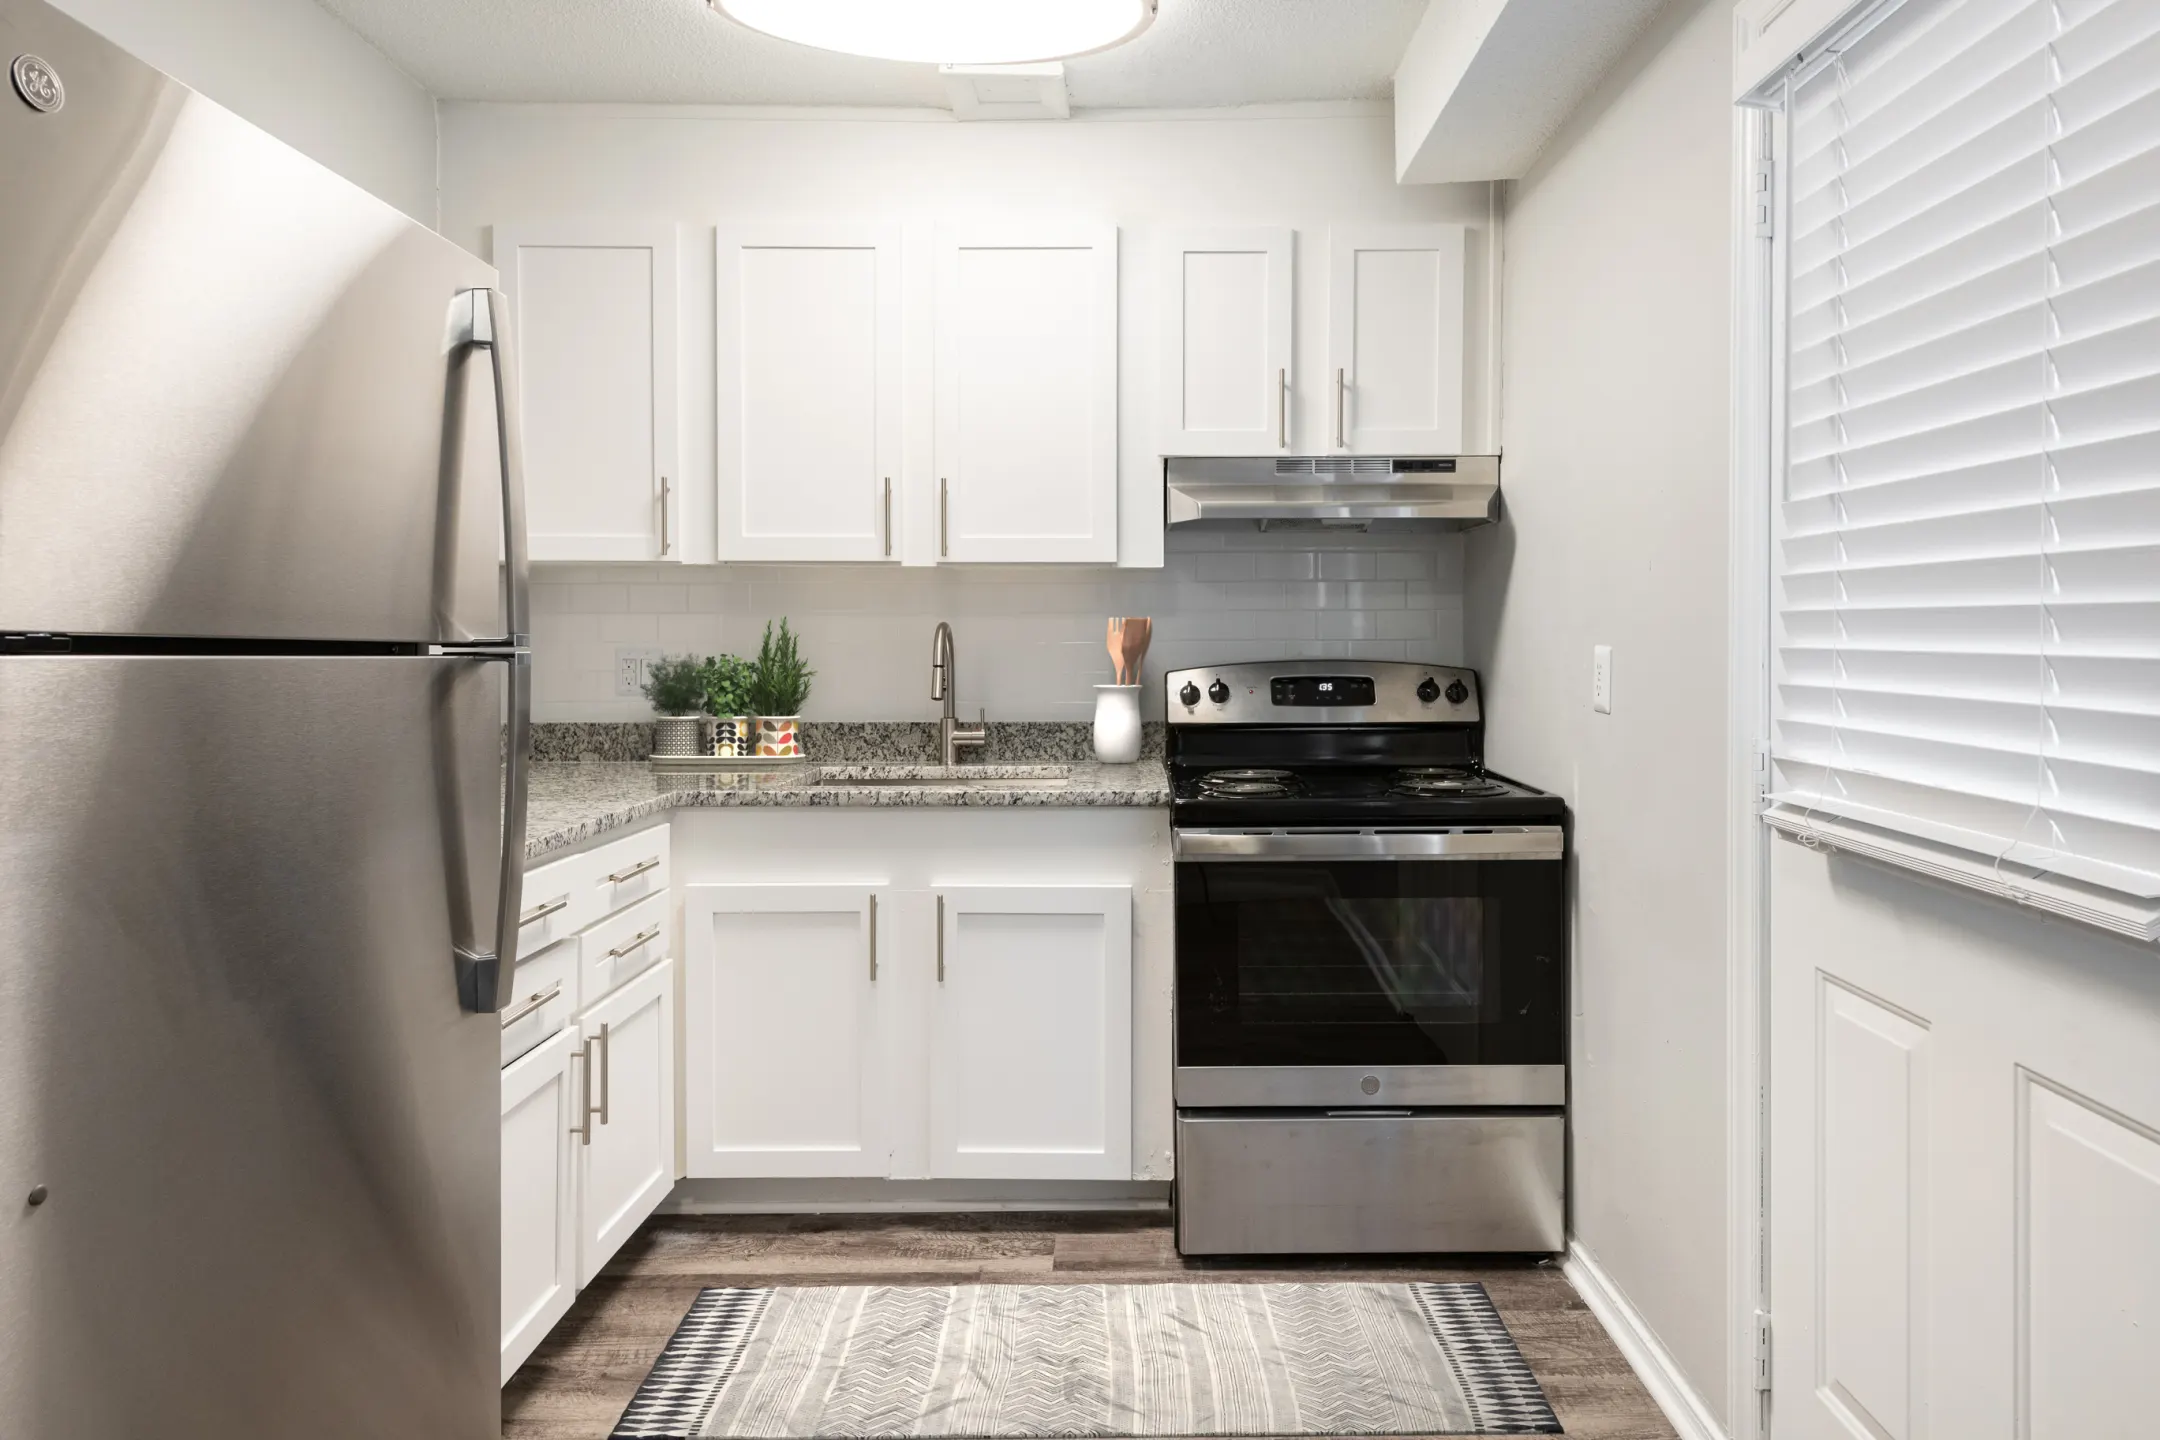 Kitchen - Sage Pointe Apartments & Townhomes - Charlotte, NC